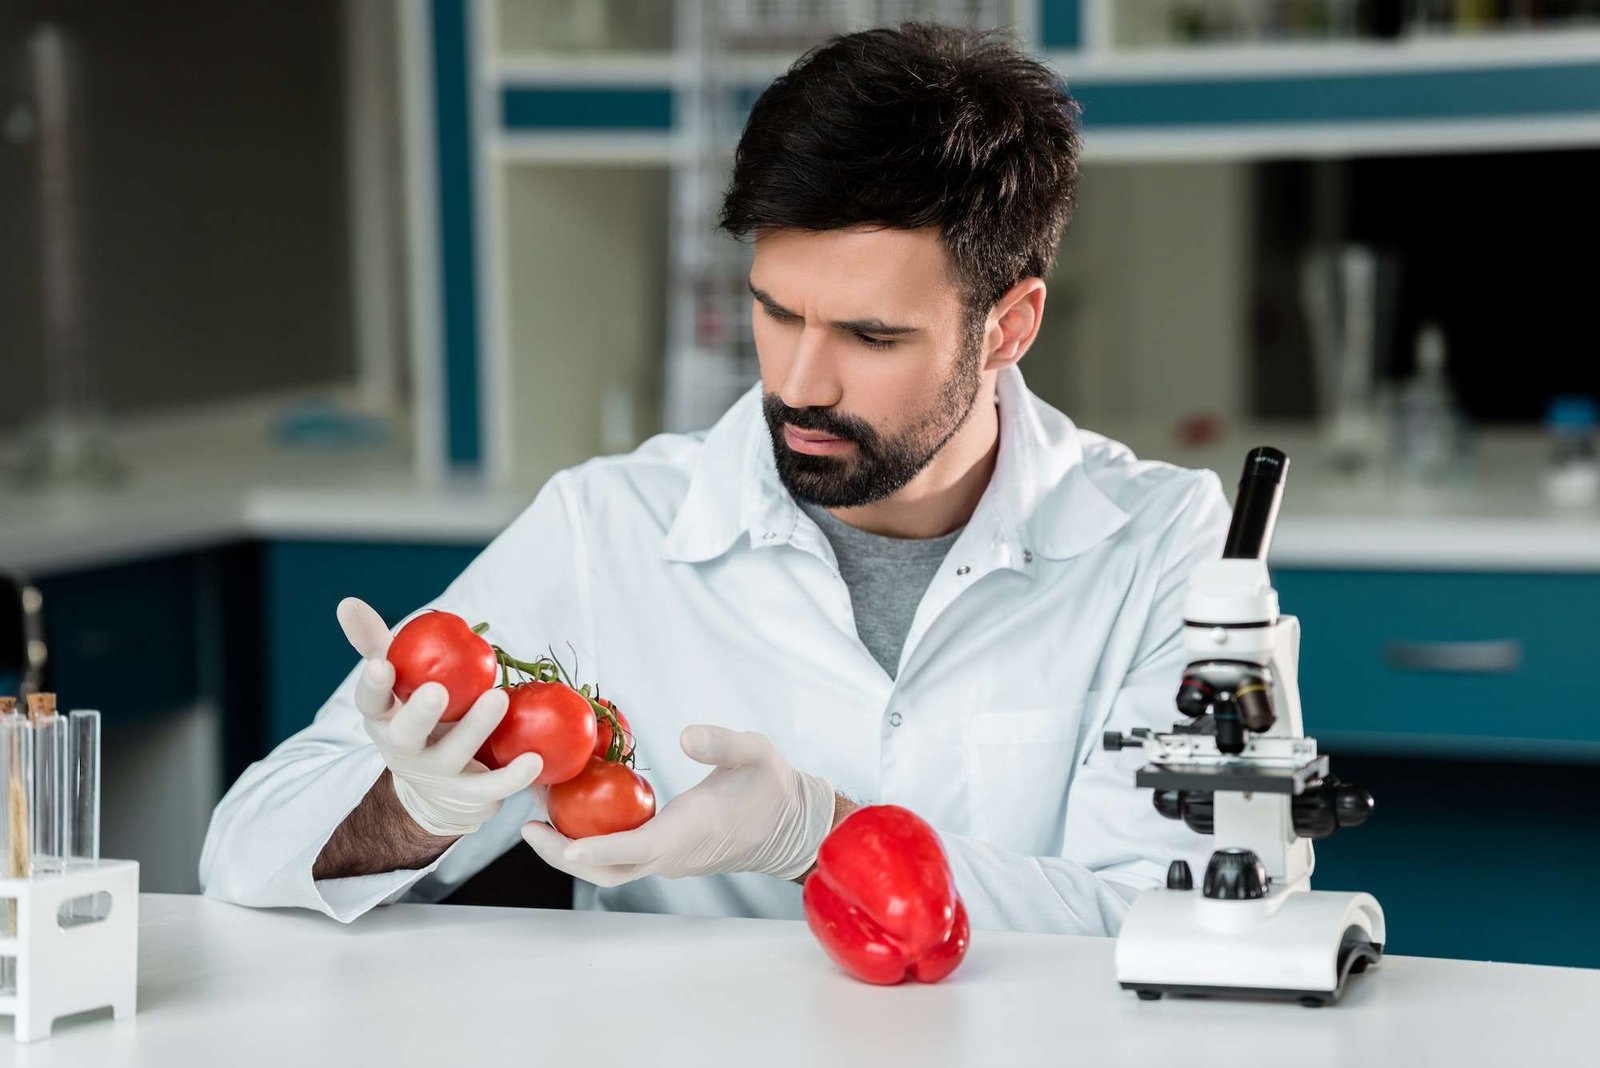 Bearded scientist in white coat working examining vegetables in laboratory